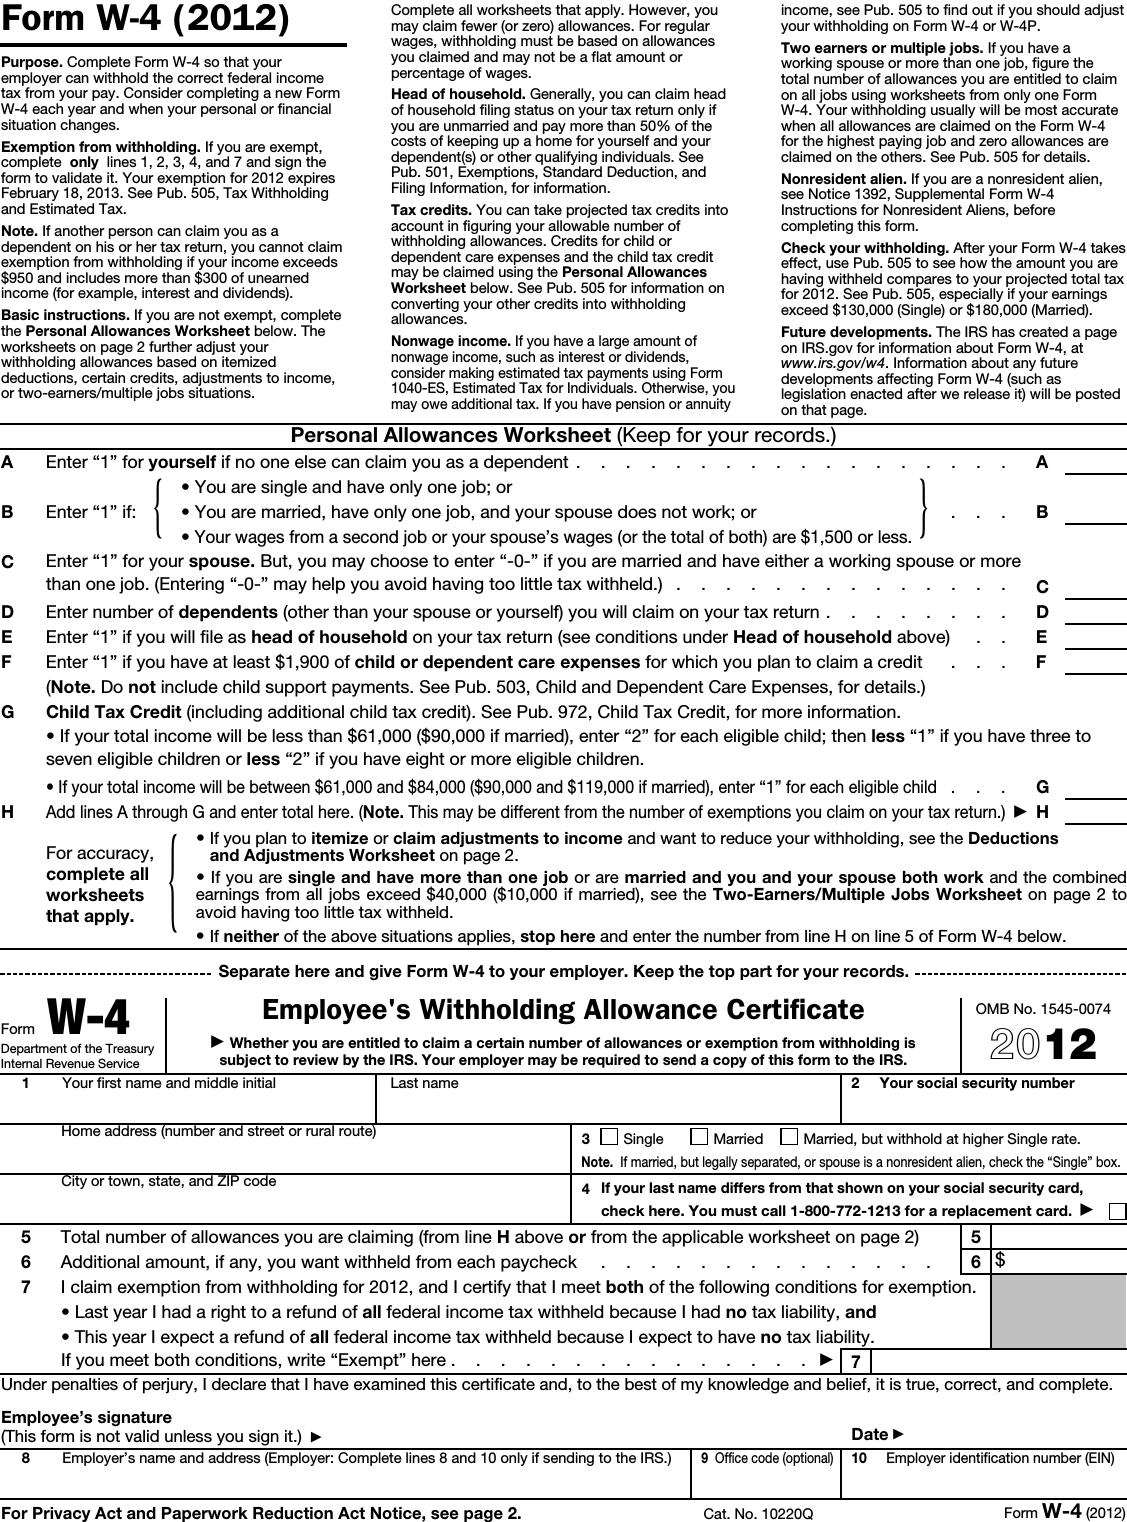 Page 1 of 2 - 10222 2  2012 Form W-4 User Manual